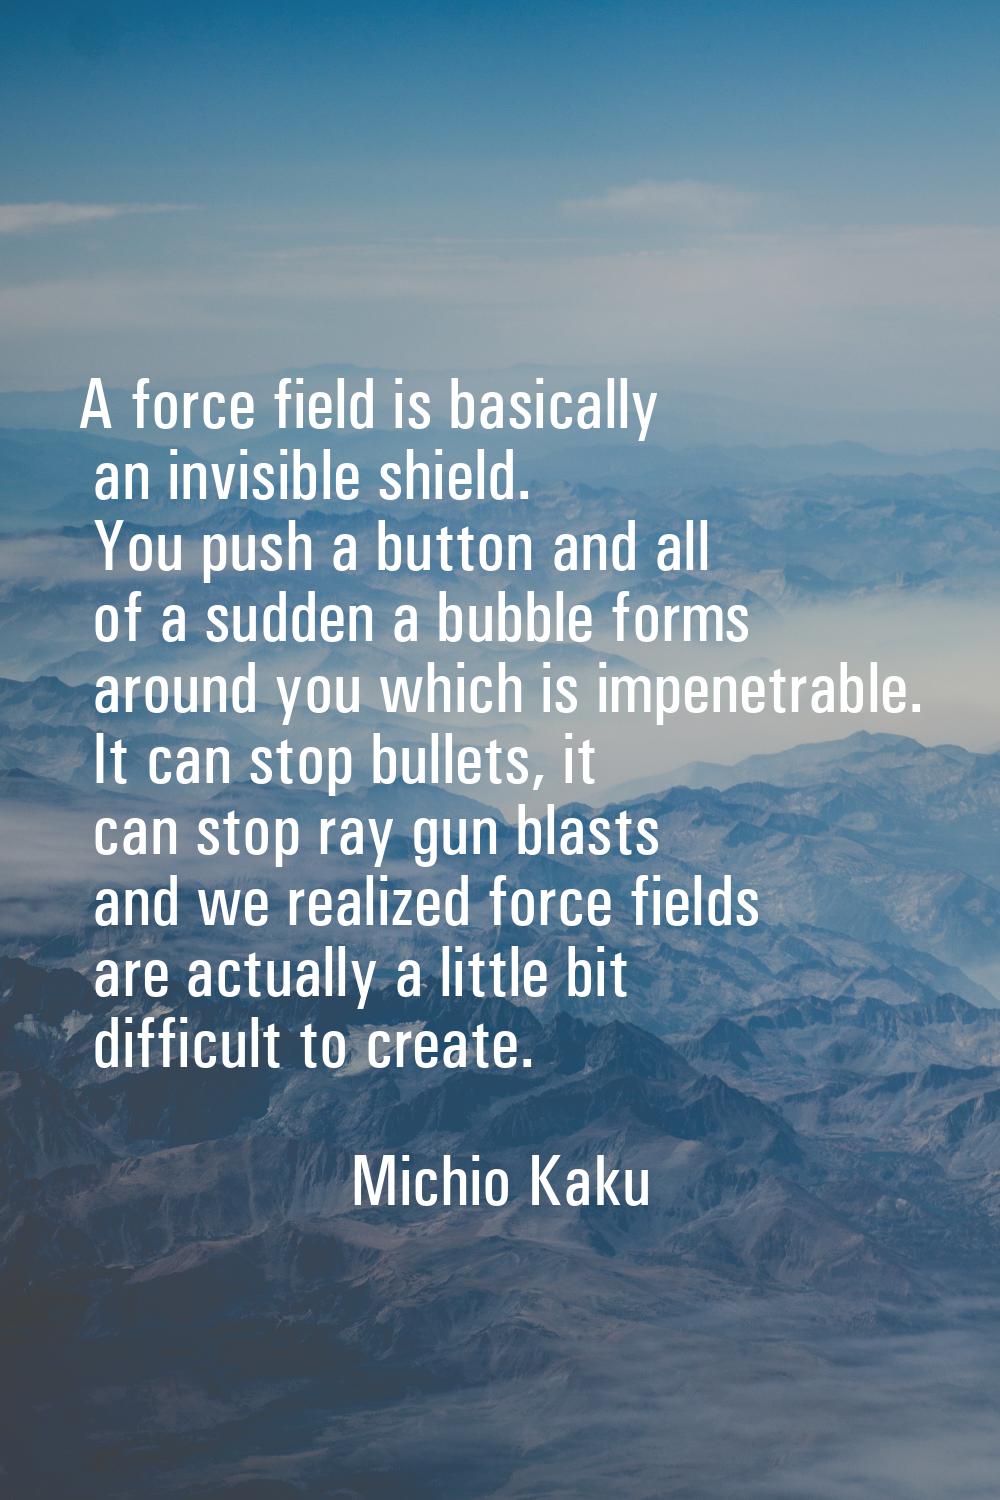 A force field is basically an invisible shield. You push a button and all of a sudden a bubble form